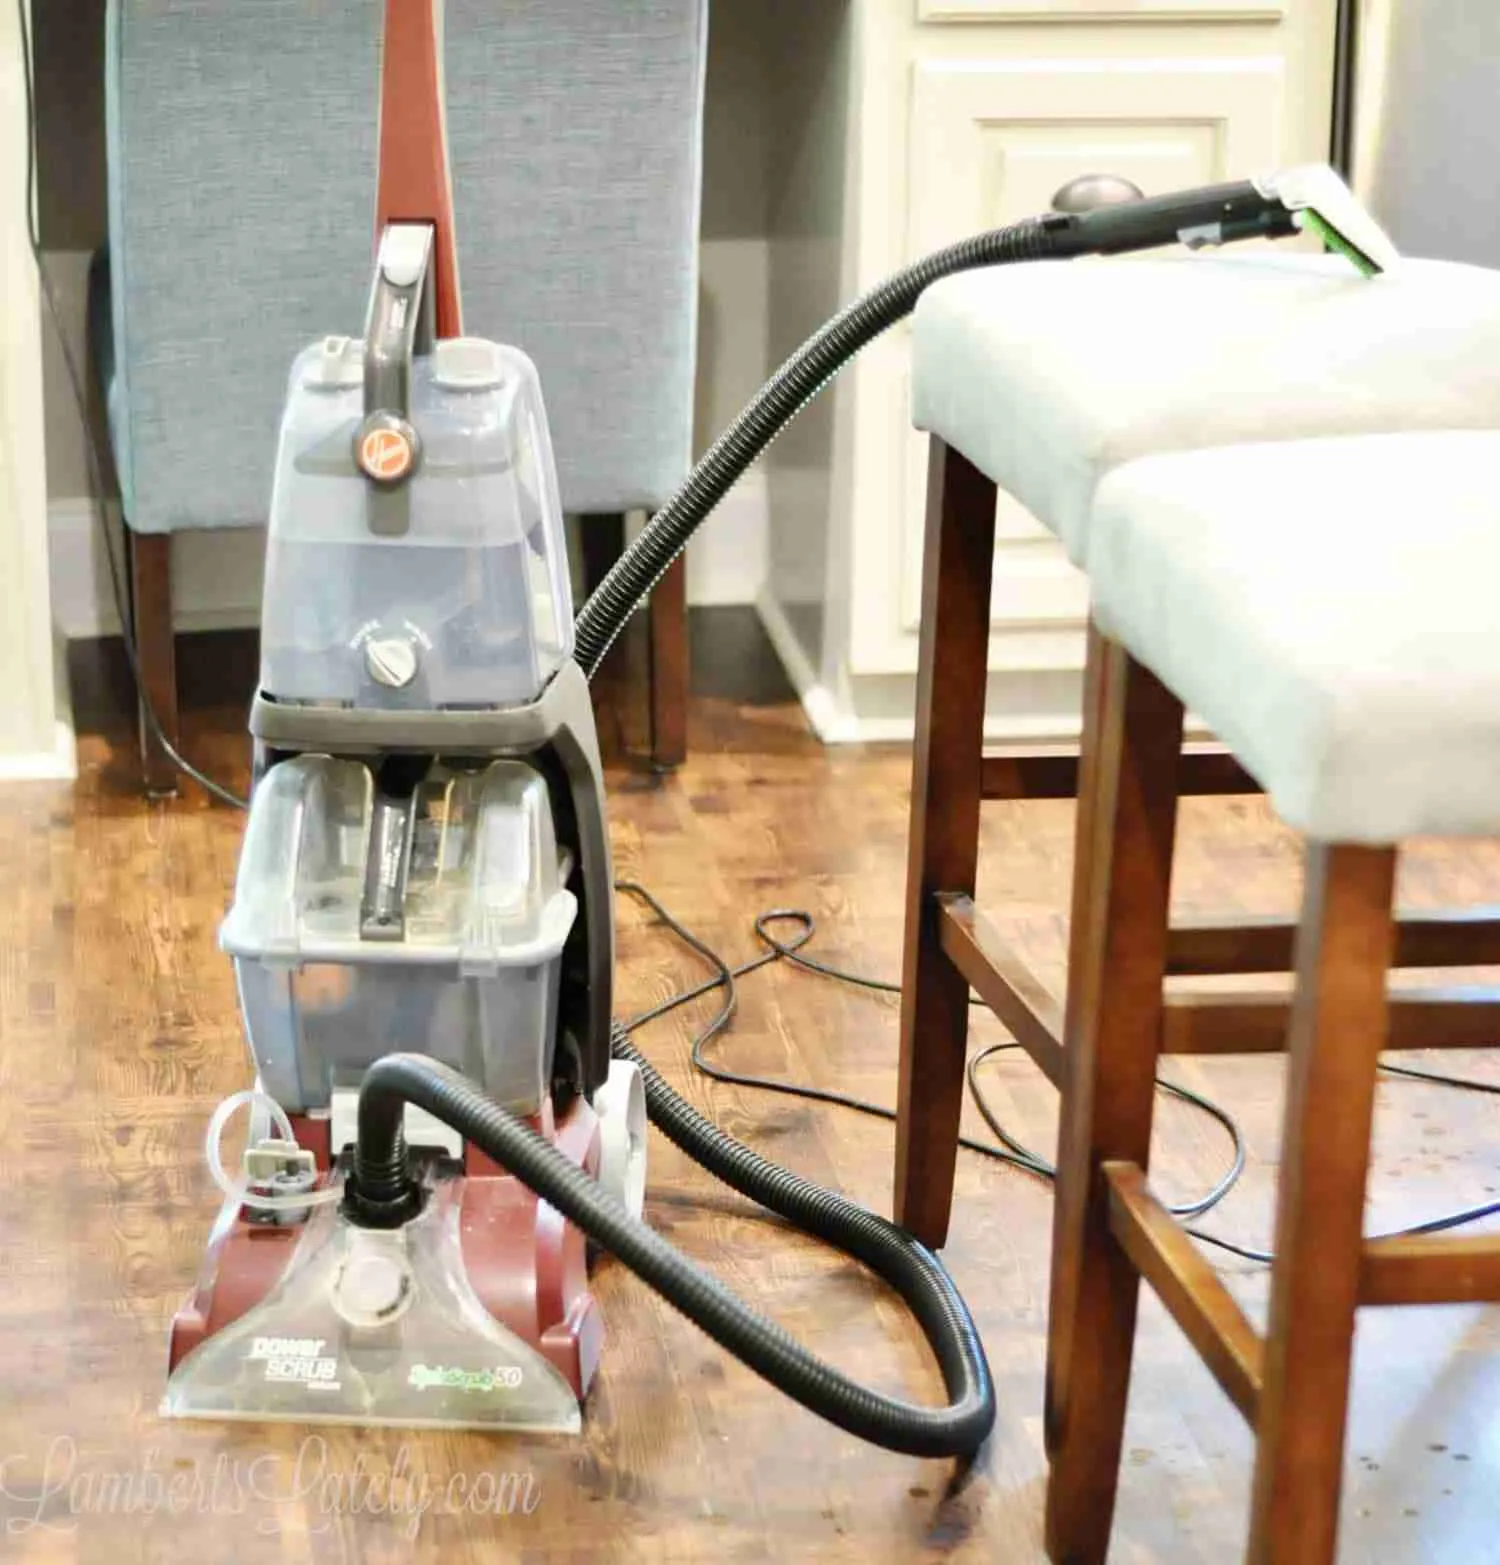 Hoover carpet cleaner sitting next to upholstered chairs